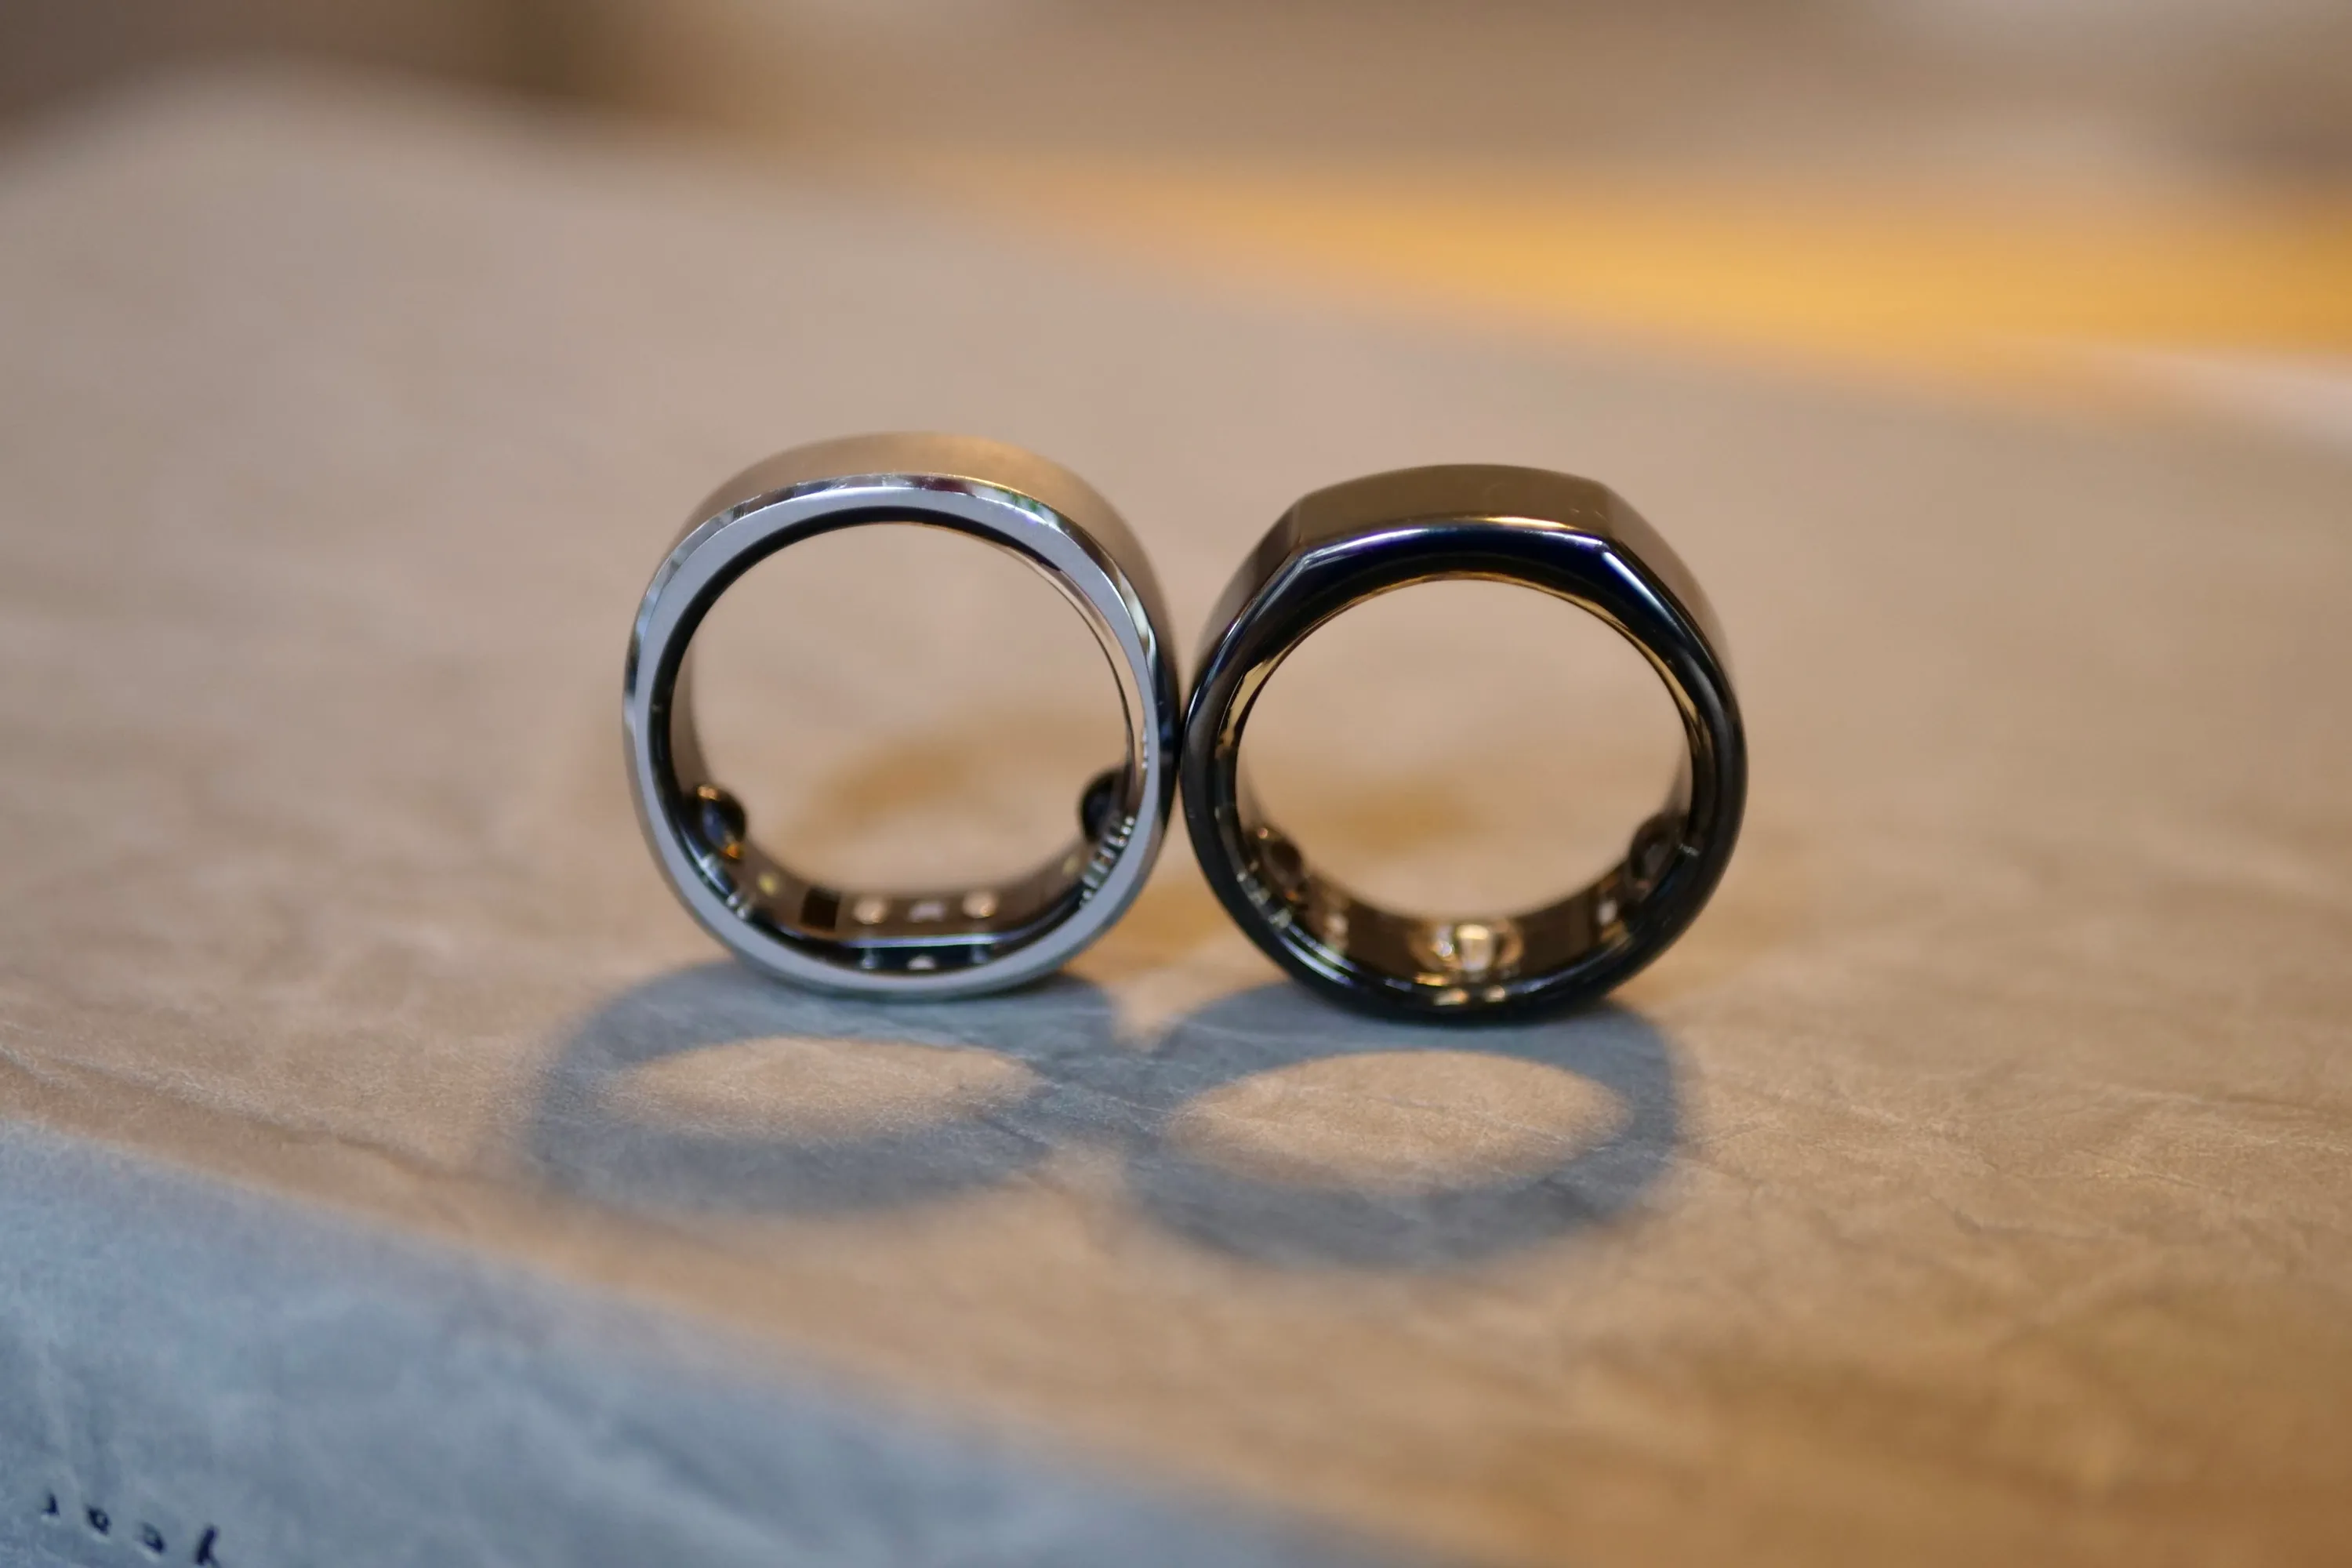 RingConn Smart Ring and Oura Ring